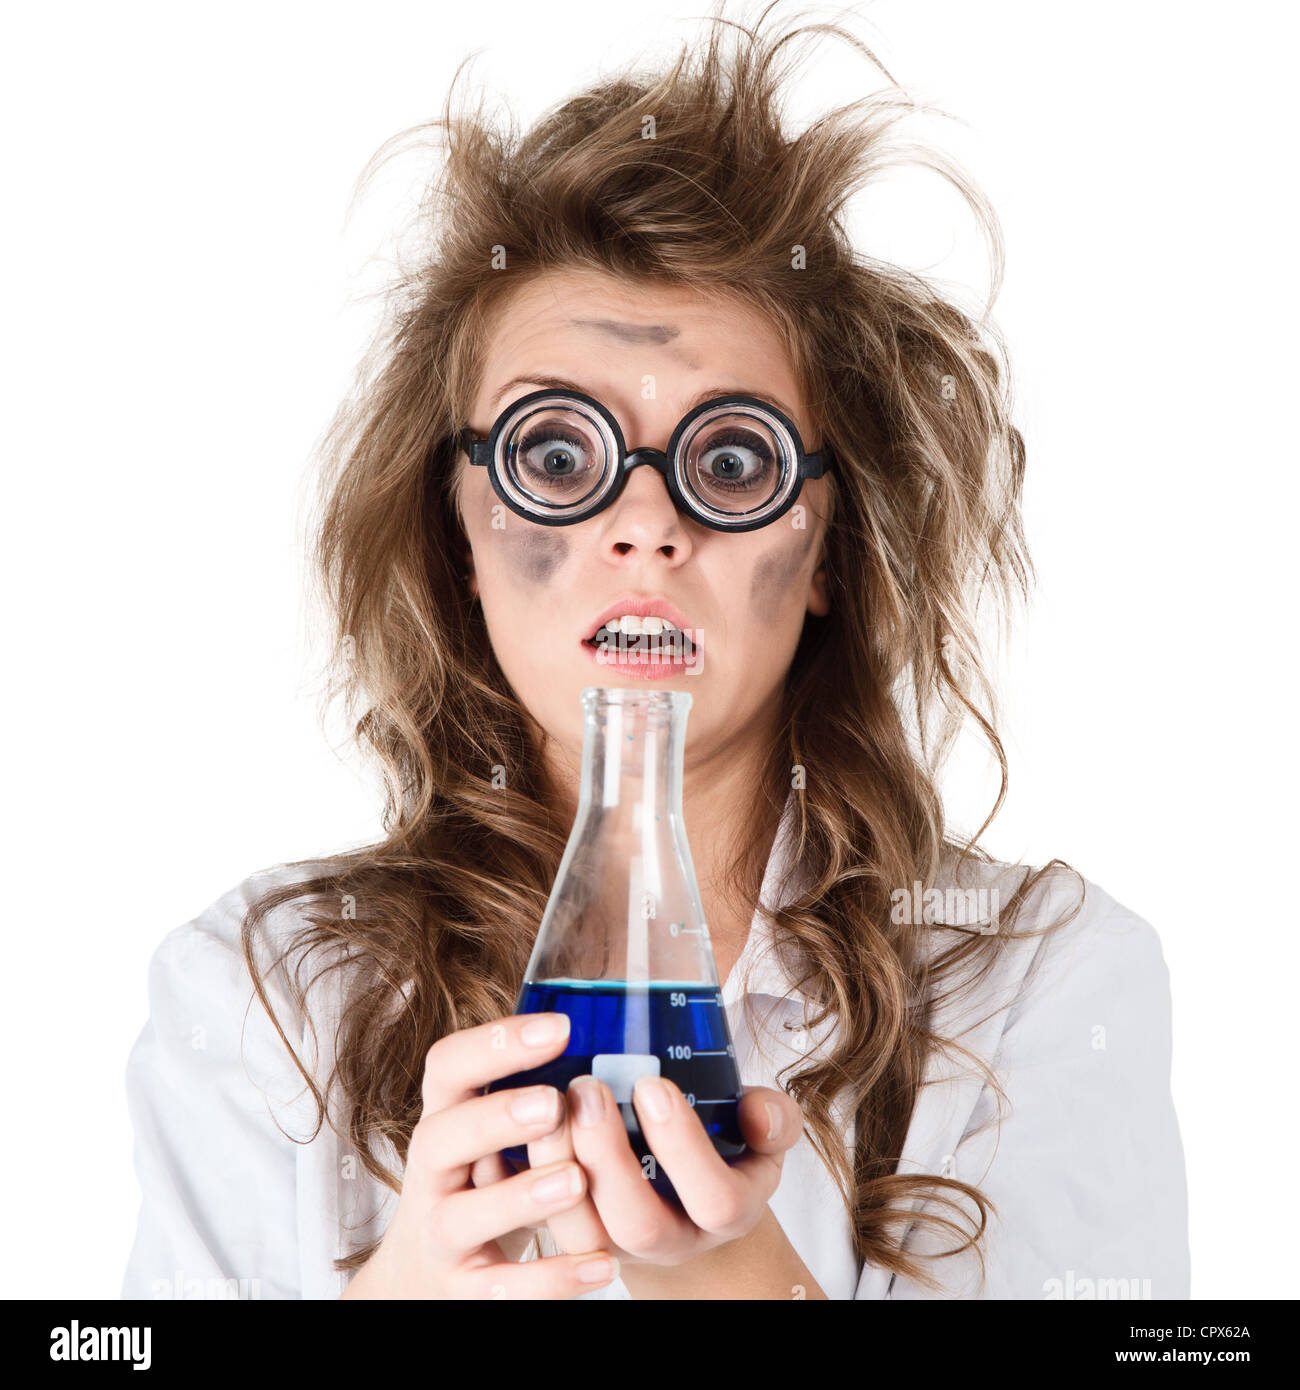 Crazy chemist woman with disheveled hair and vial in hands Stock Photo